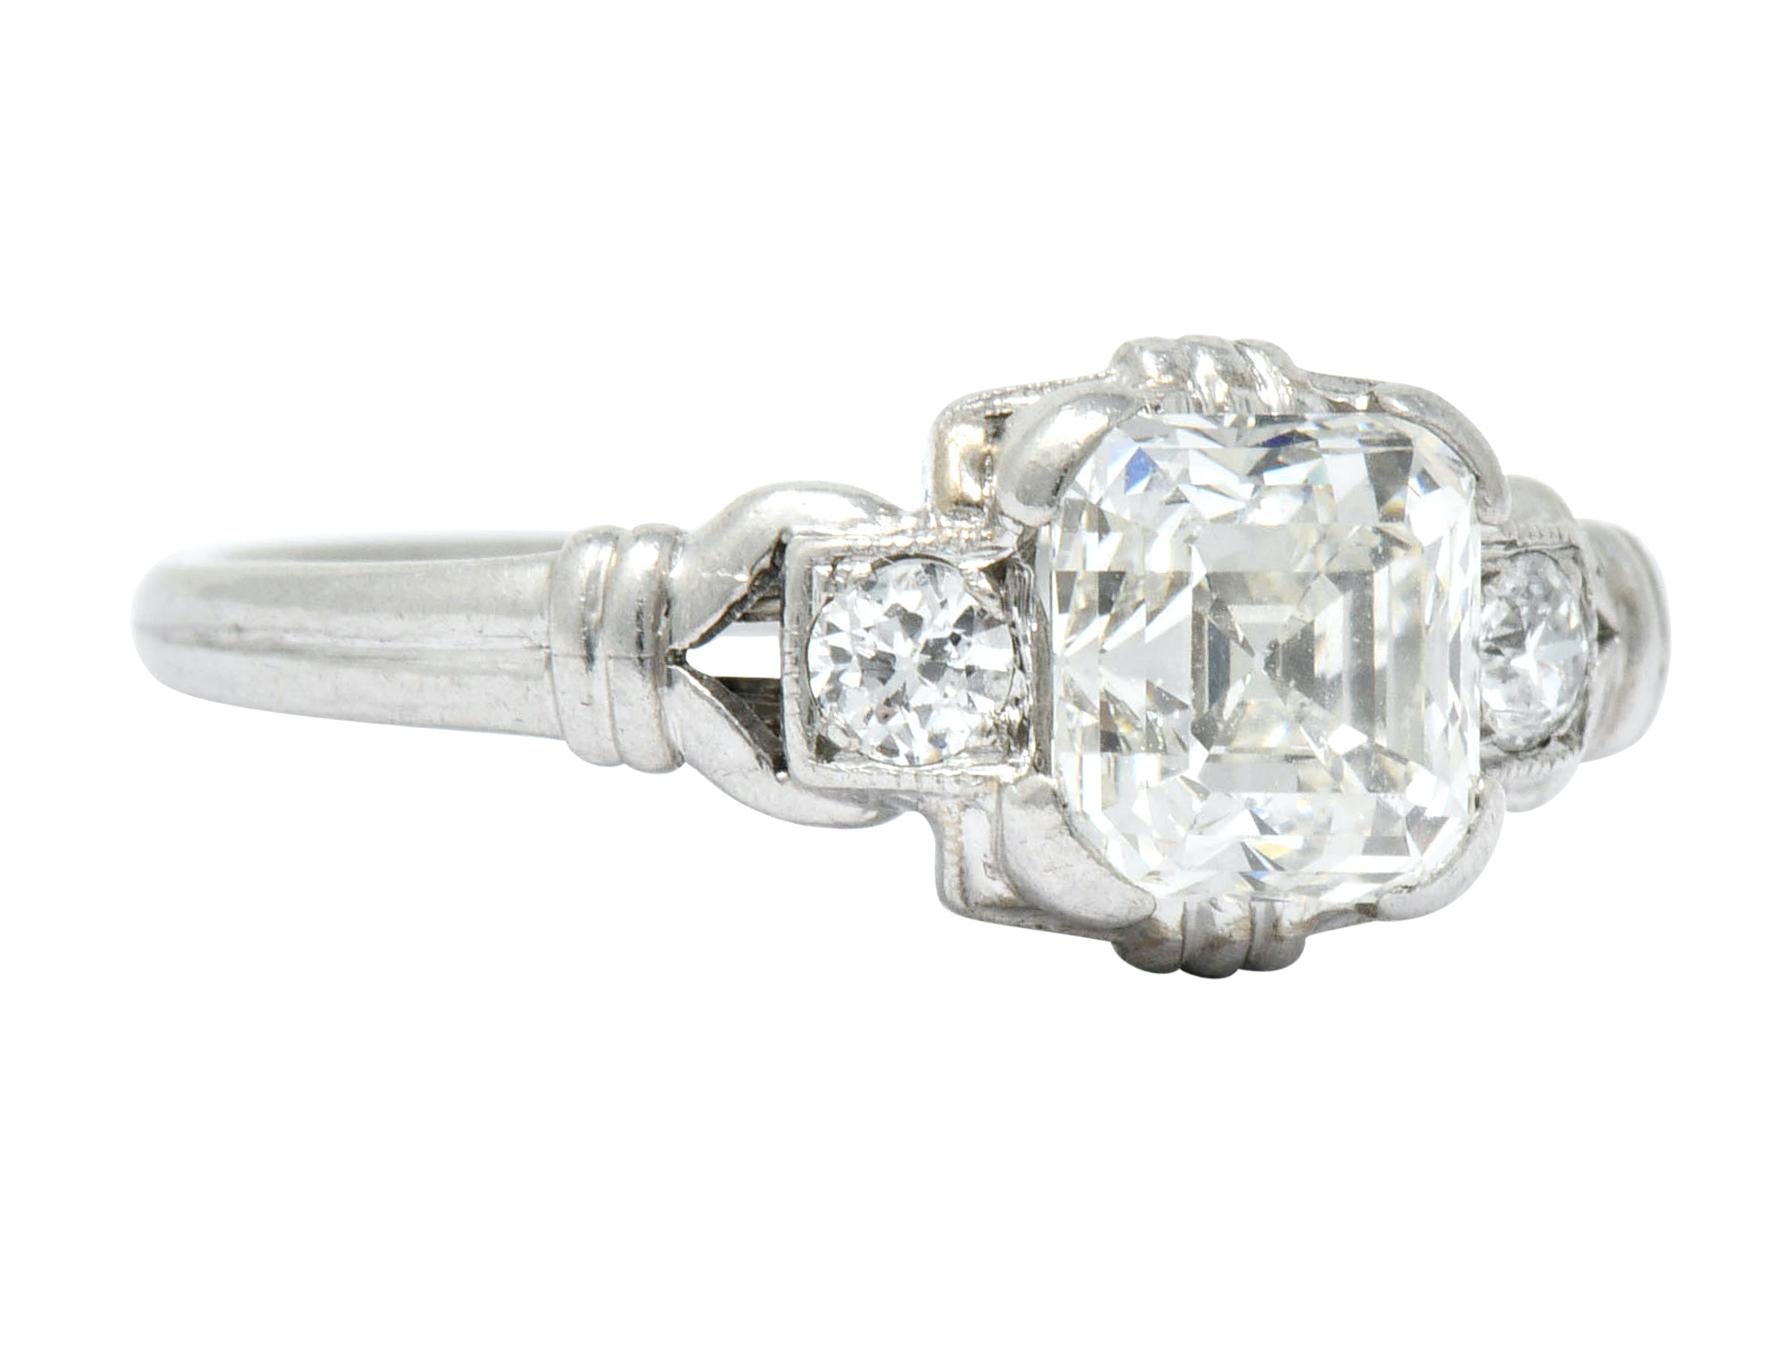 Centering in a low profile square form head, with an asscher cut diamond weighing approximately 1.25 carats, J color and SI1 clarity

Flanked by two transitional cut diamonds weighing approximately 0.10 carat total, J color and SI clarity

Completed